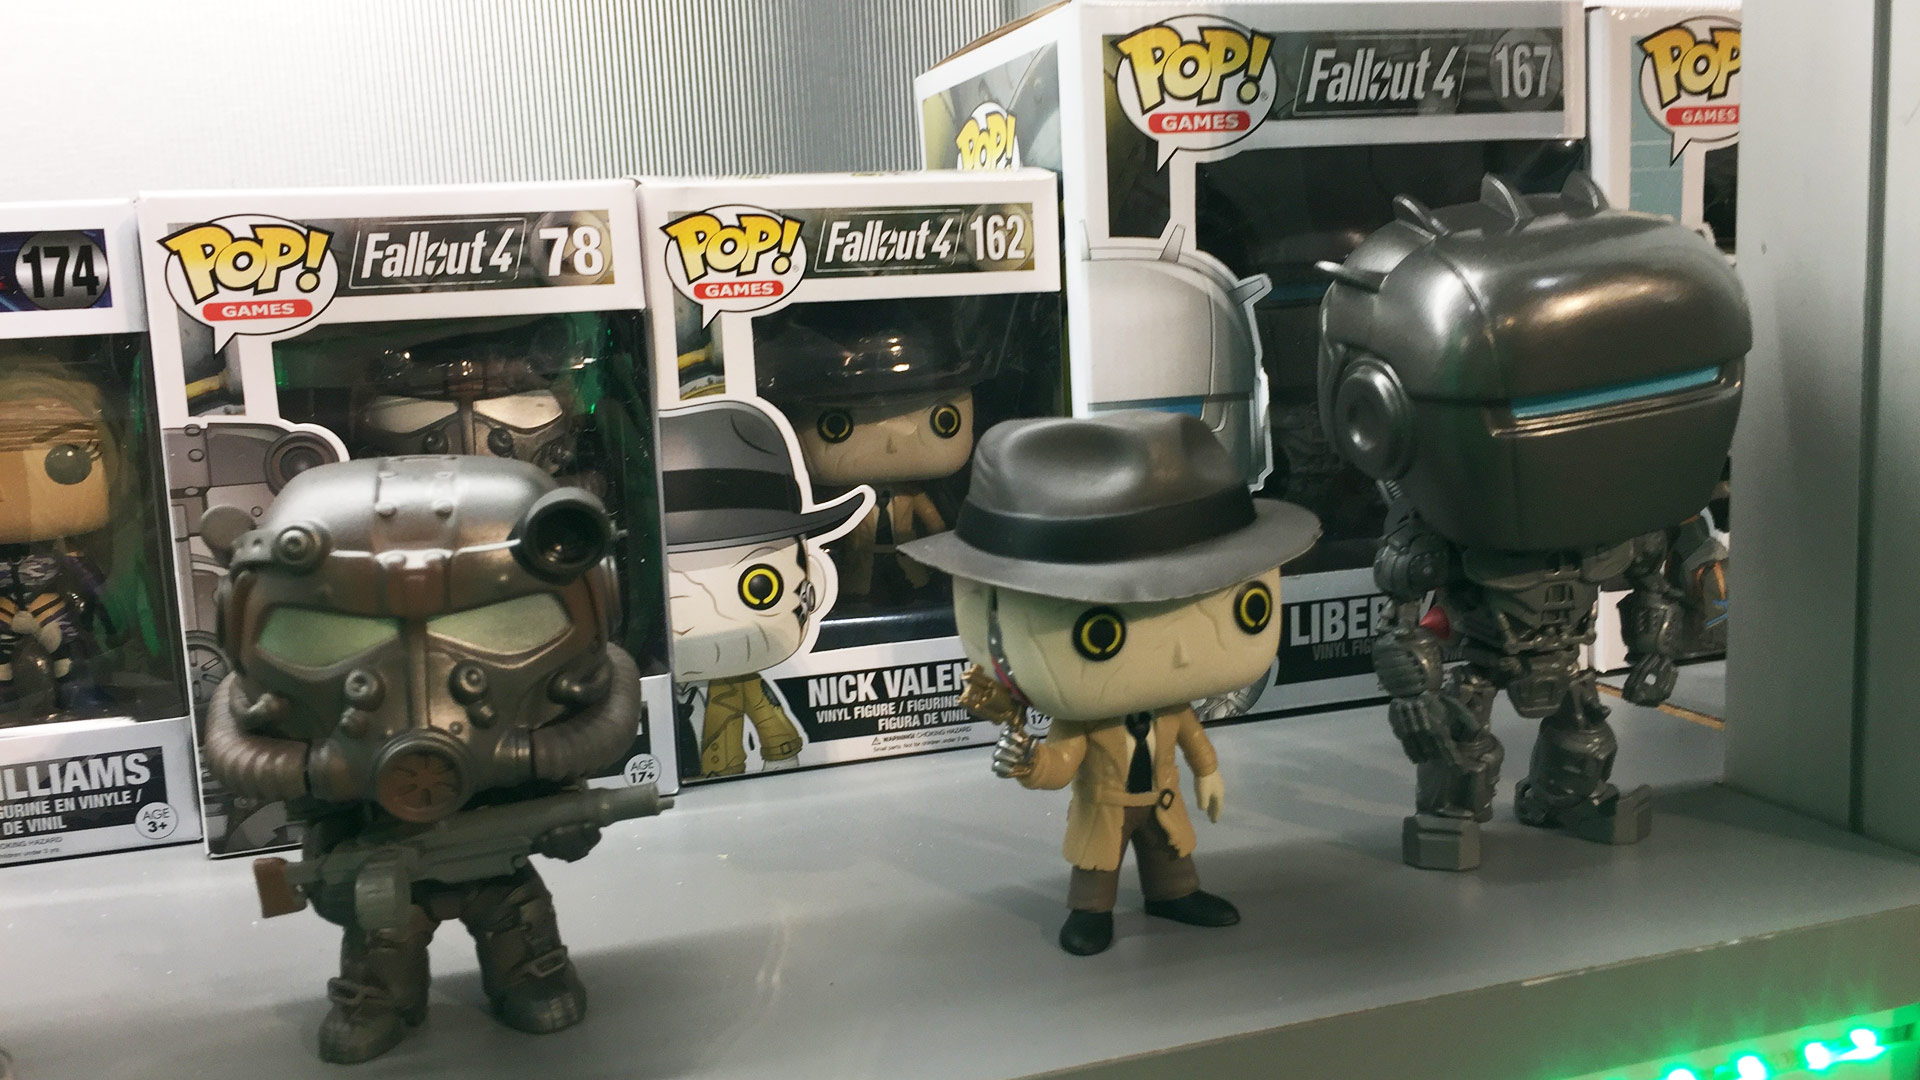 Funko Pop Fallout 4 with T-60 Power Armor #78, Nick Valentine #162, Liberty Prime #167 Vinyl Figures at Toy Fair 2017